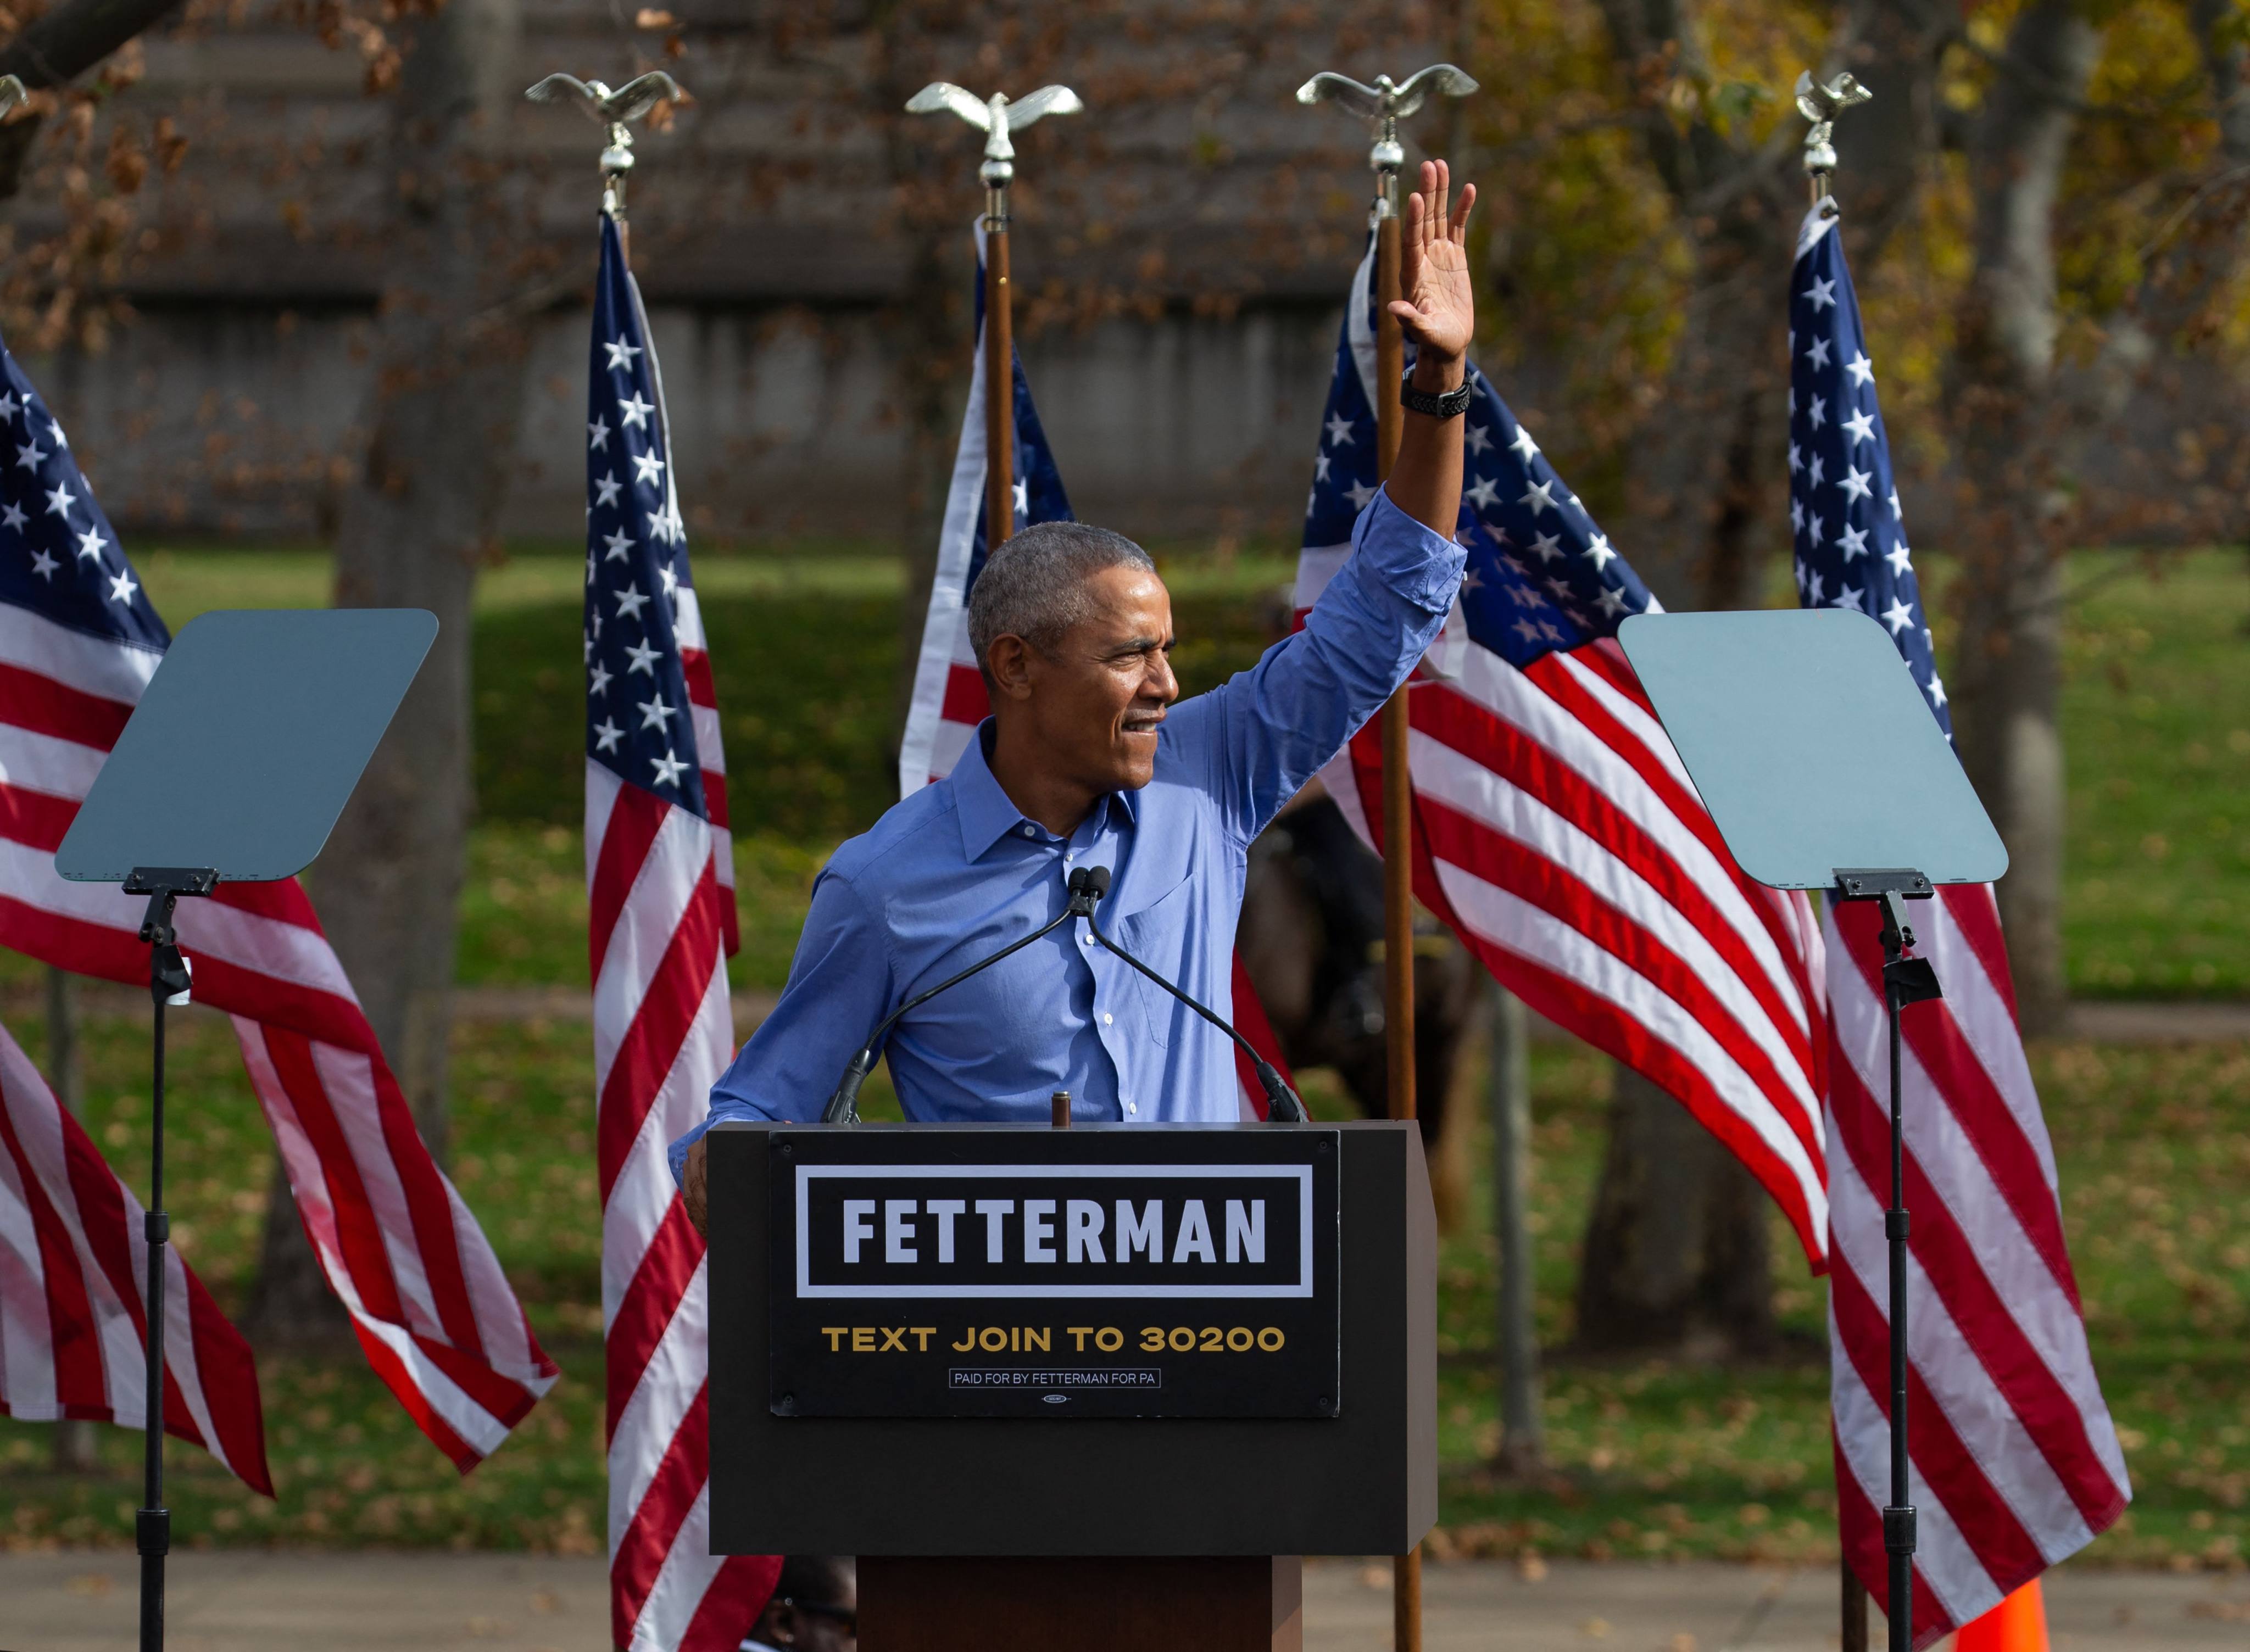 Former President Barack Obama attends a rally in support of Democratic Senate candidate John Fetterman in Pittsburgh on Nov. 5, 2022. Photo: TNS